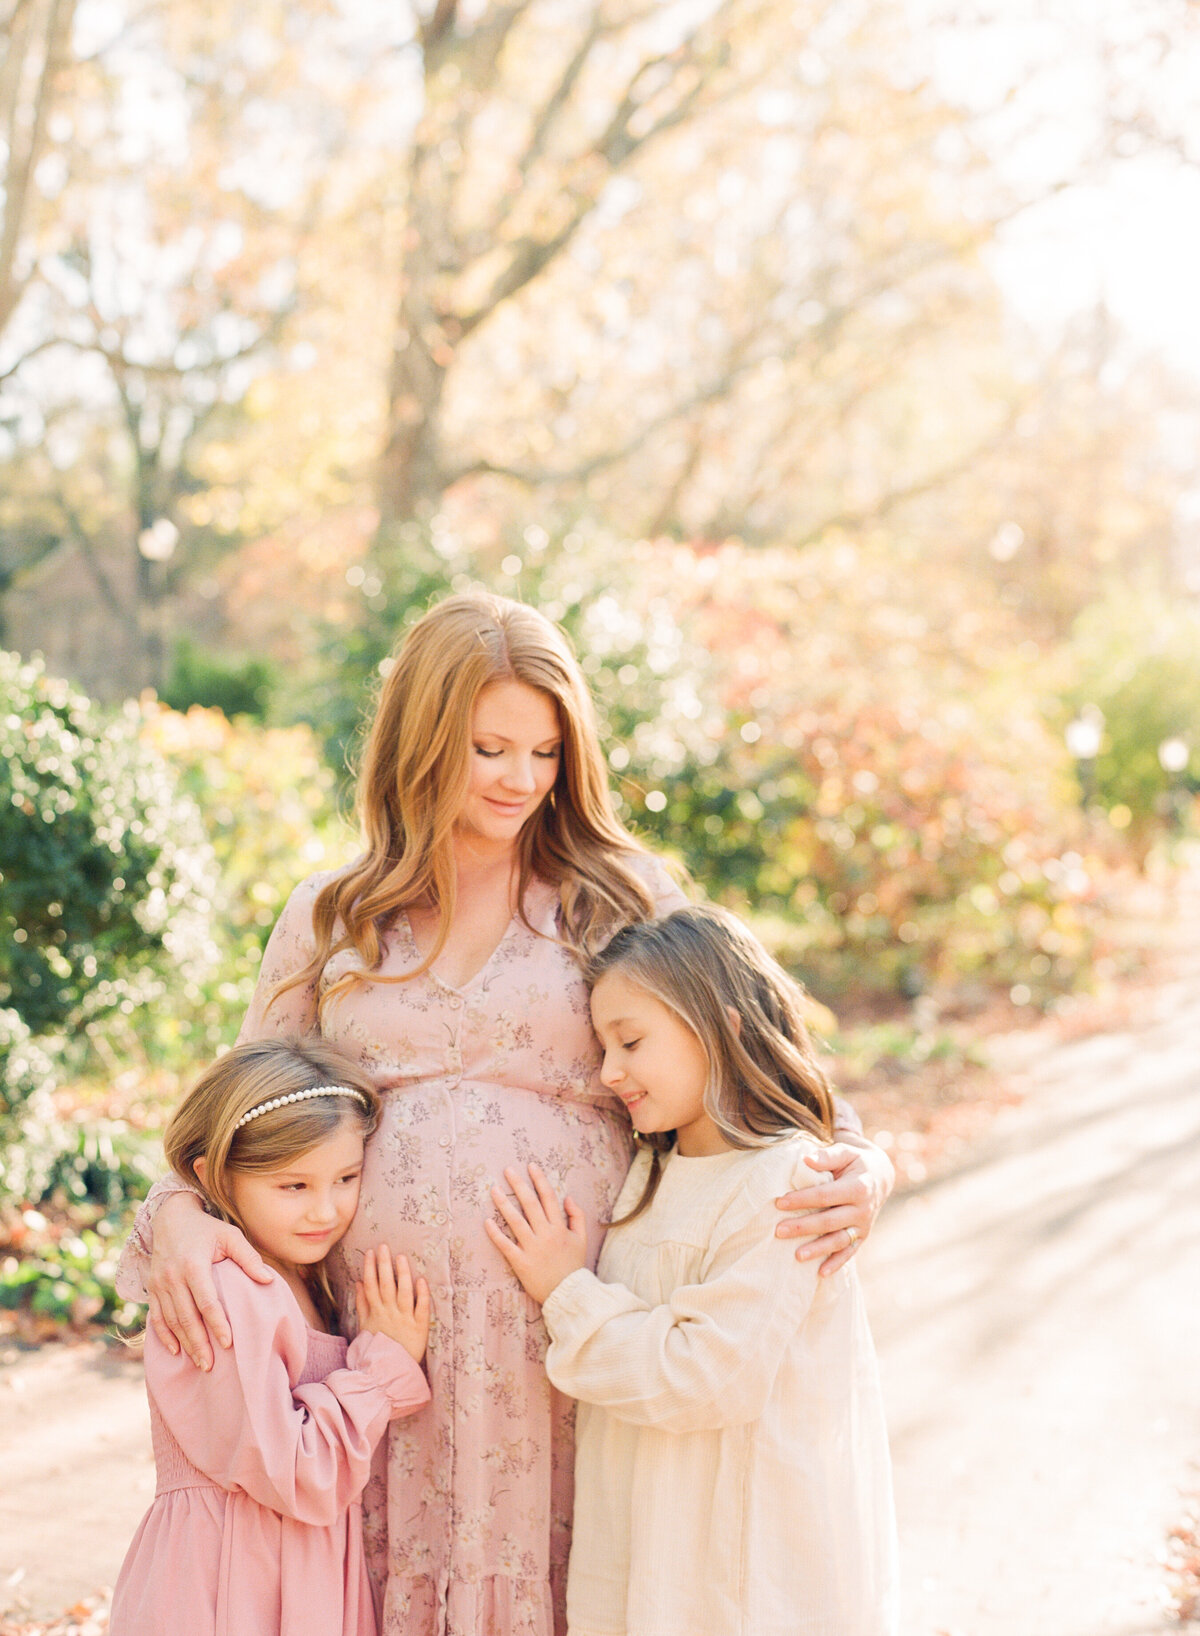 Mom and daughters snuggle during a raleigh maternity session. Photographed by Raleigh maternity photographers A.J. Dunlap Photography.